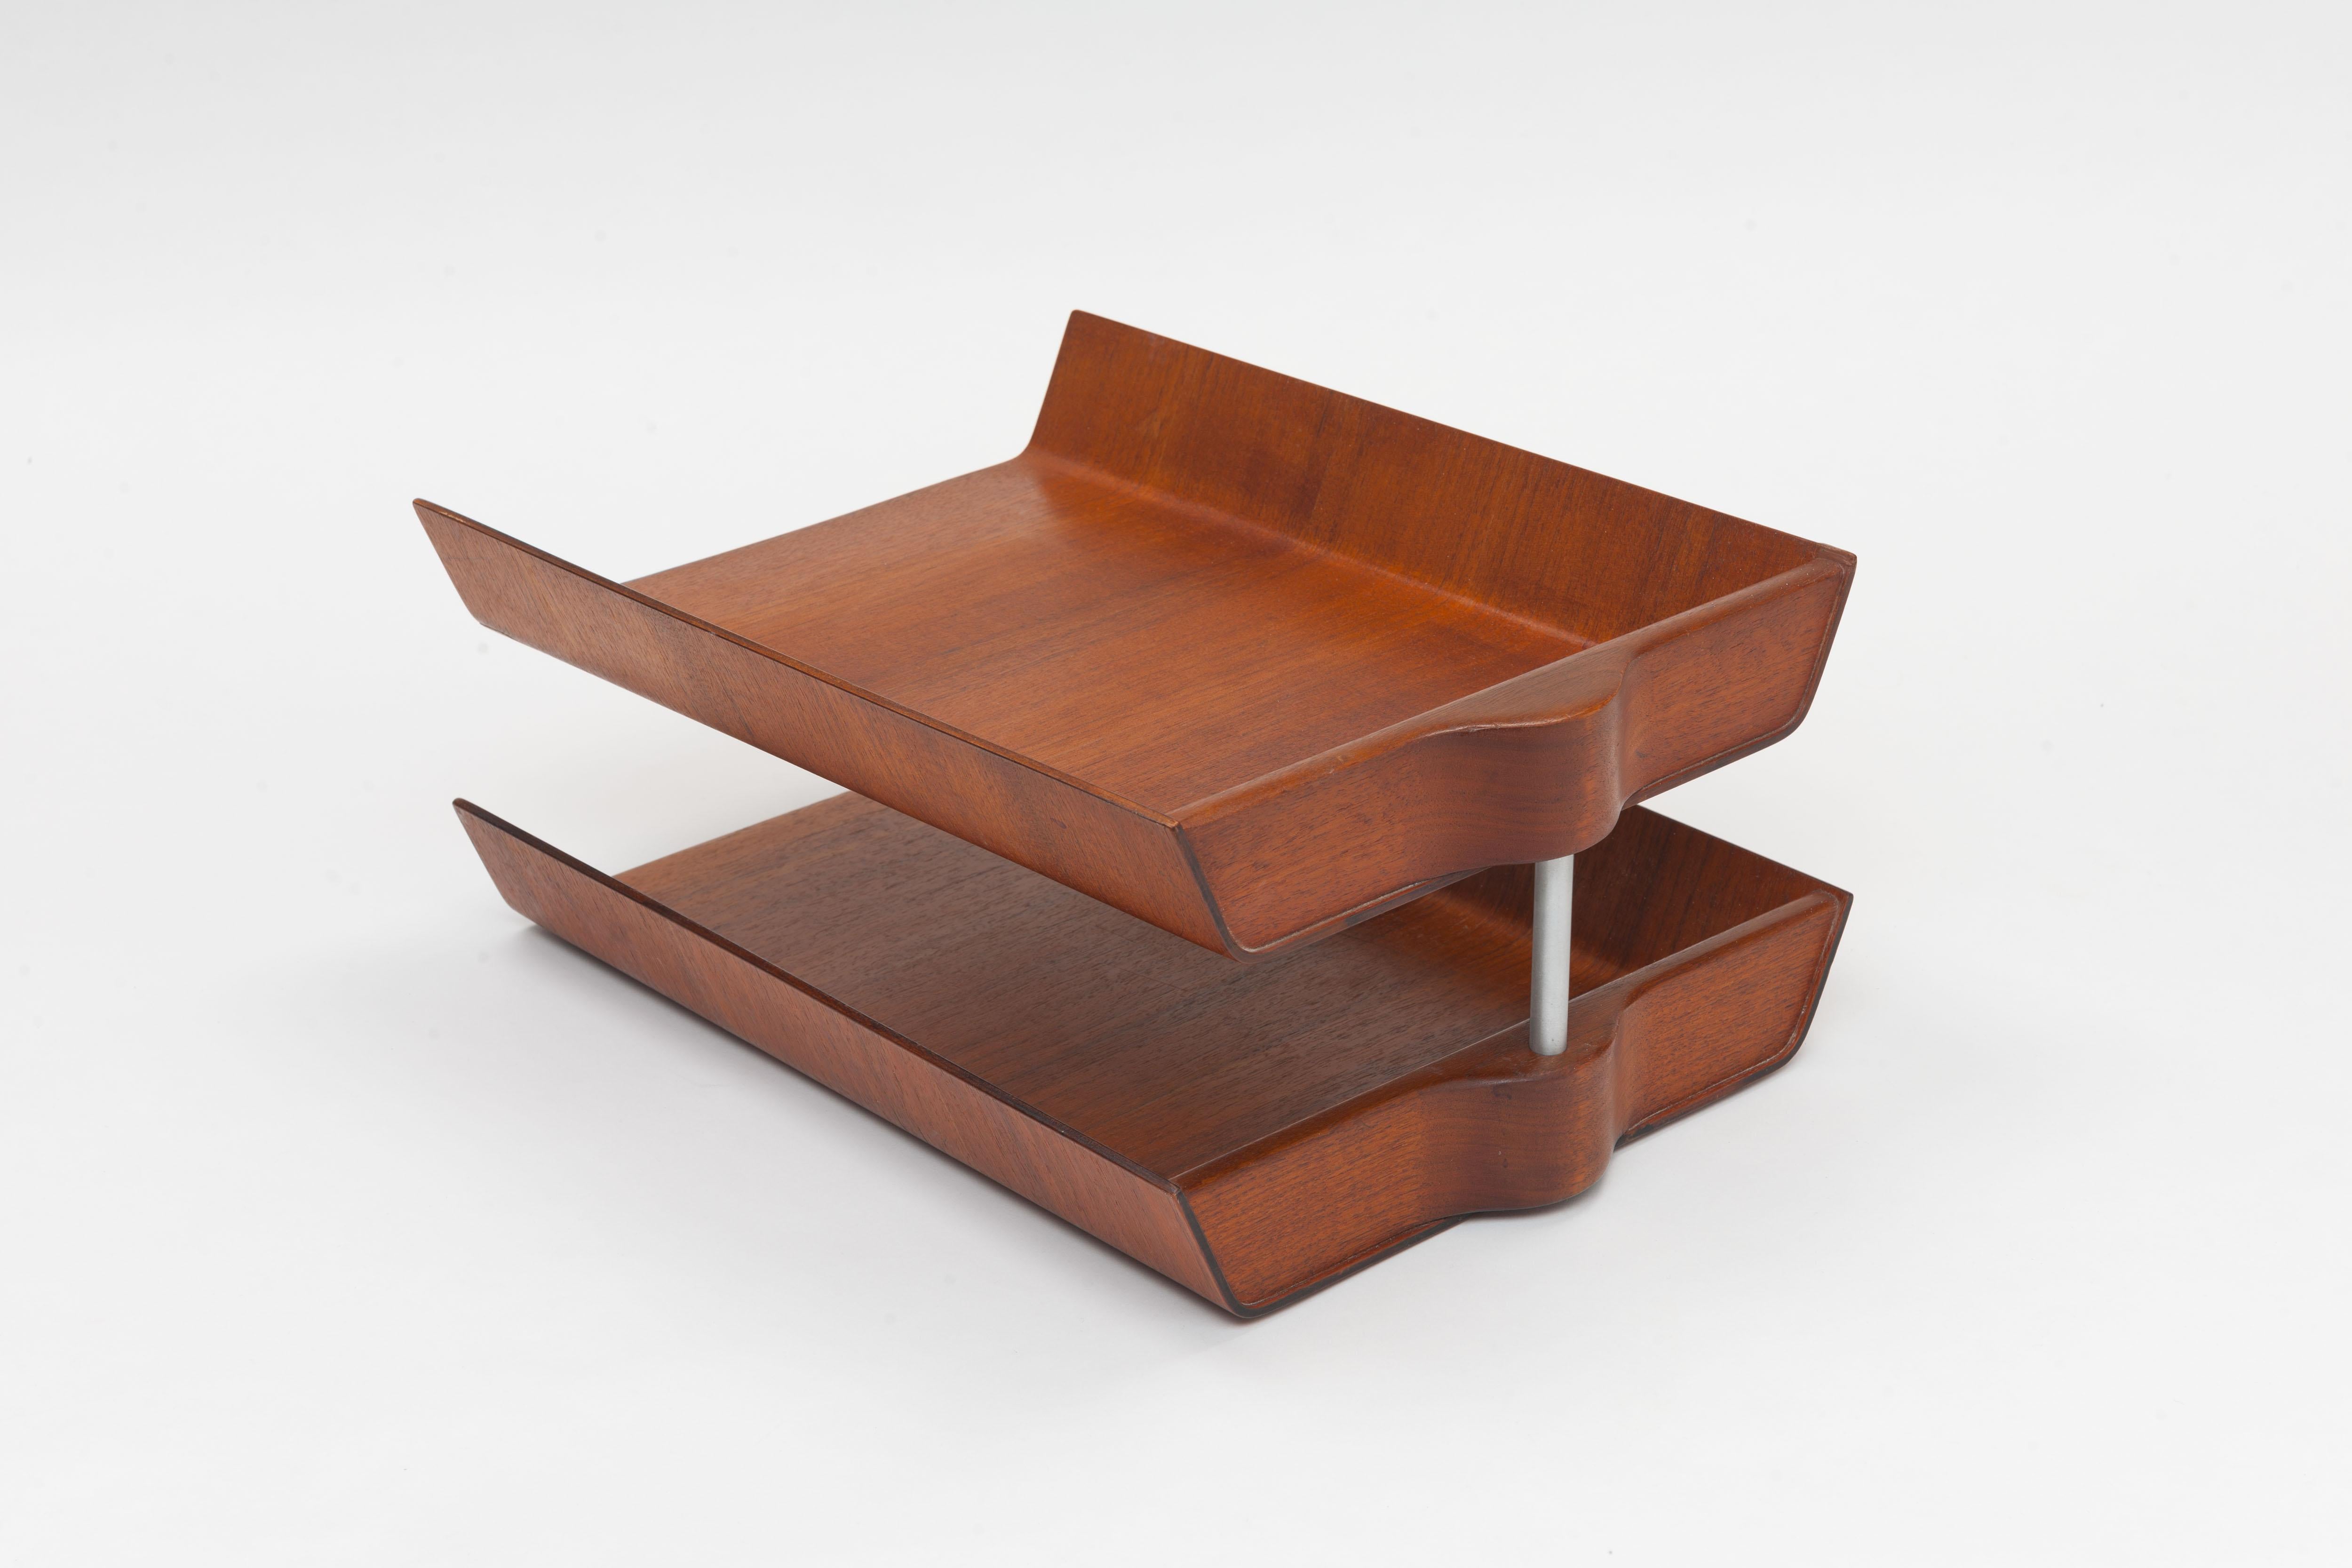 This double pivoting desk tray was designed by American designer Florence Knoll in 1948 and is a collectable midcentury accessory. The trays are made of walnut plywood with a solid wooden back pivoting on a metal support.
A wonderful desk office